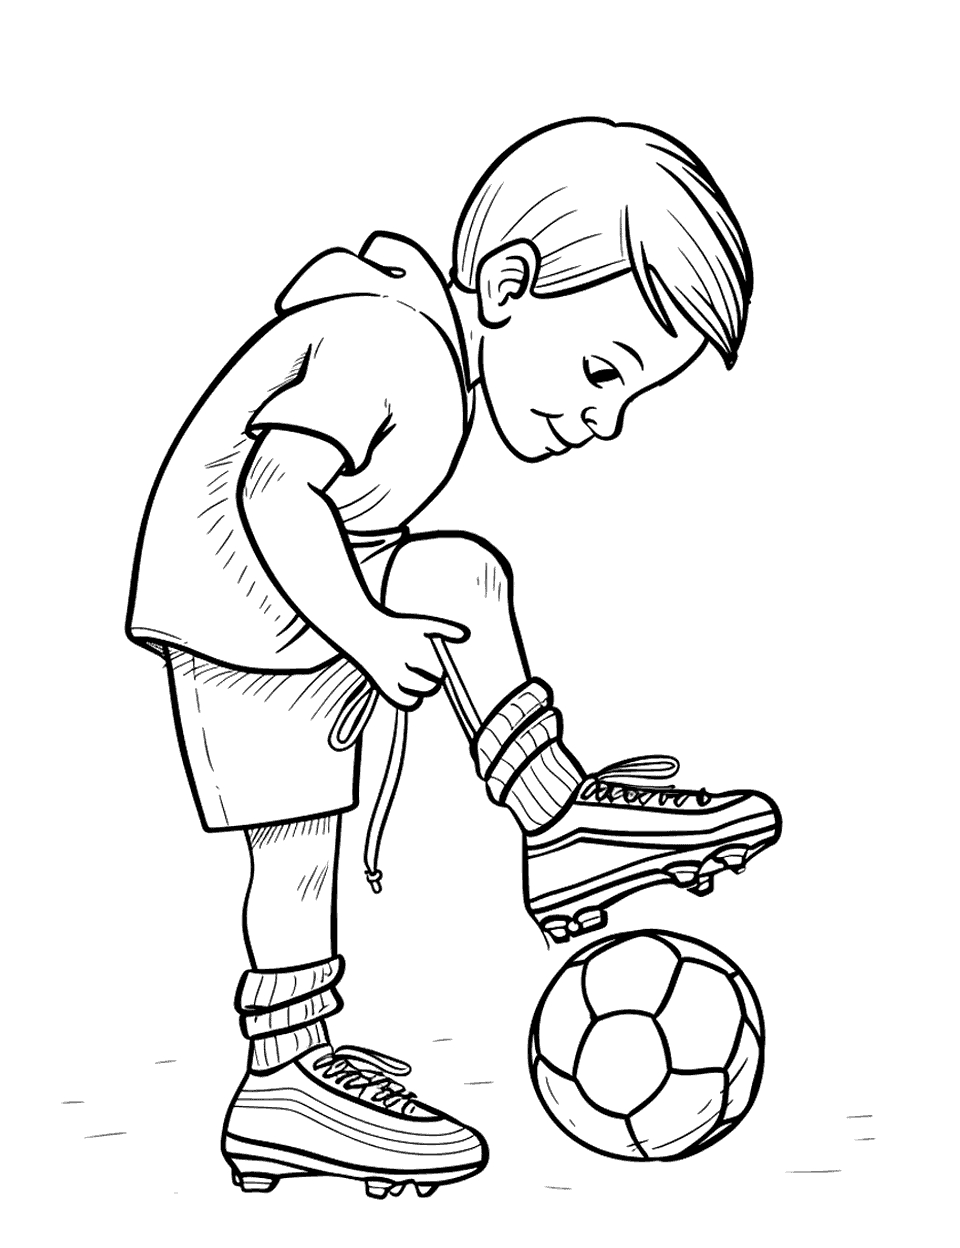 First Soccer Game Coloring Page - A child lacing up their soccer cleats, excited for their first soccer game.